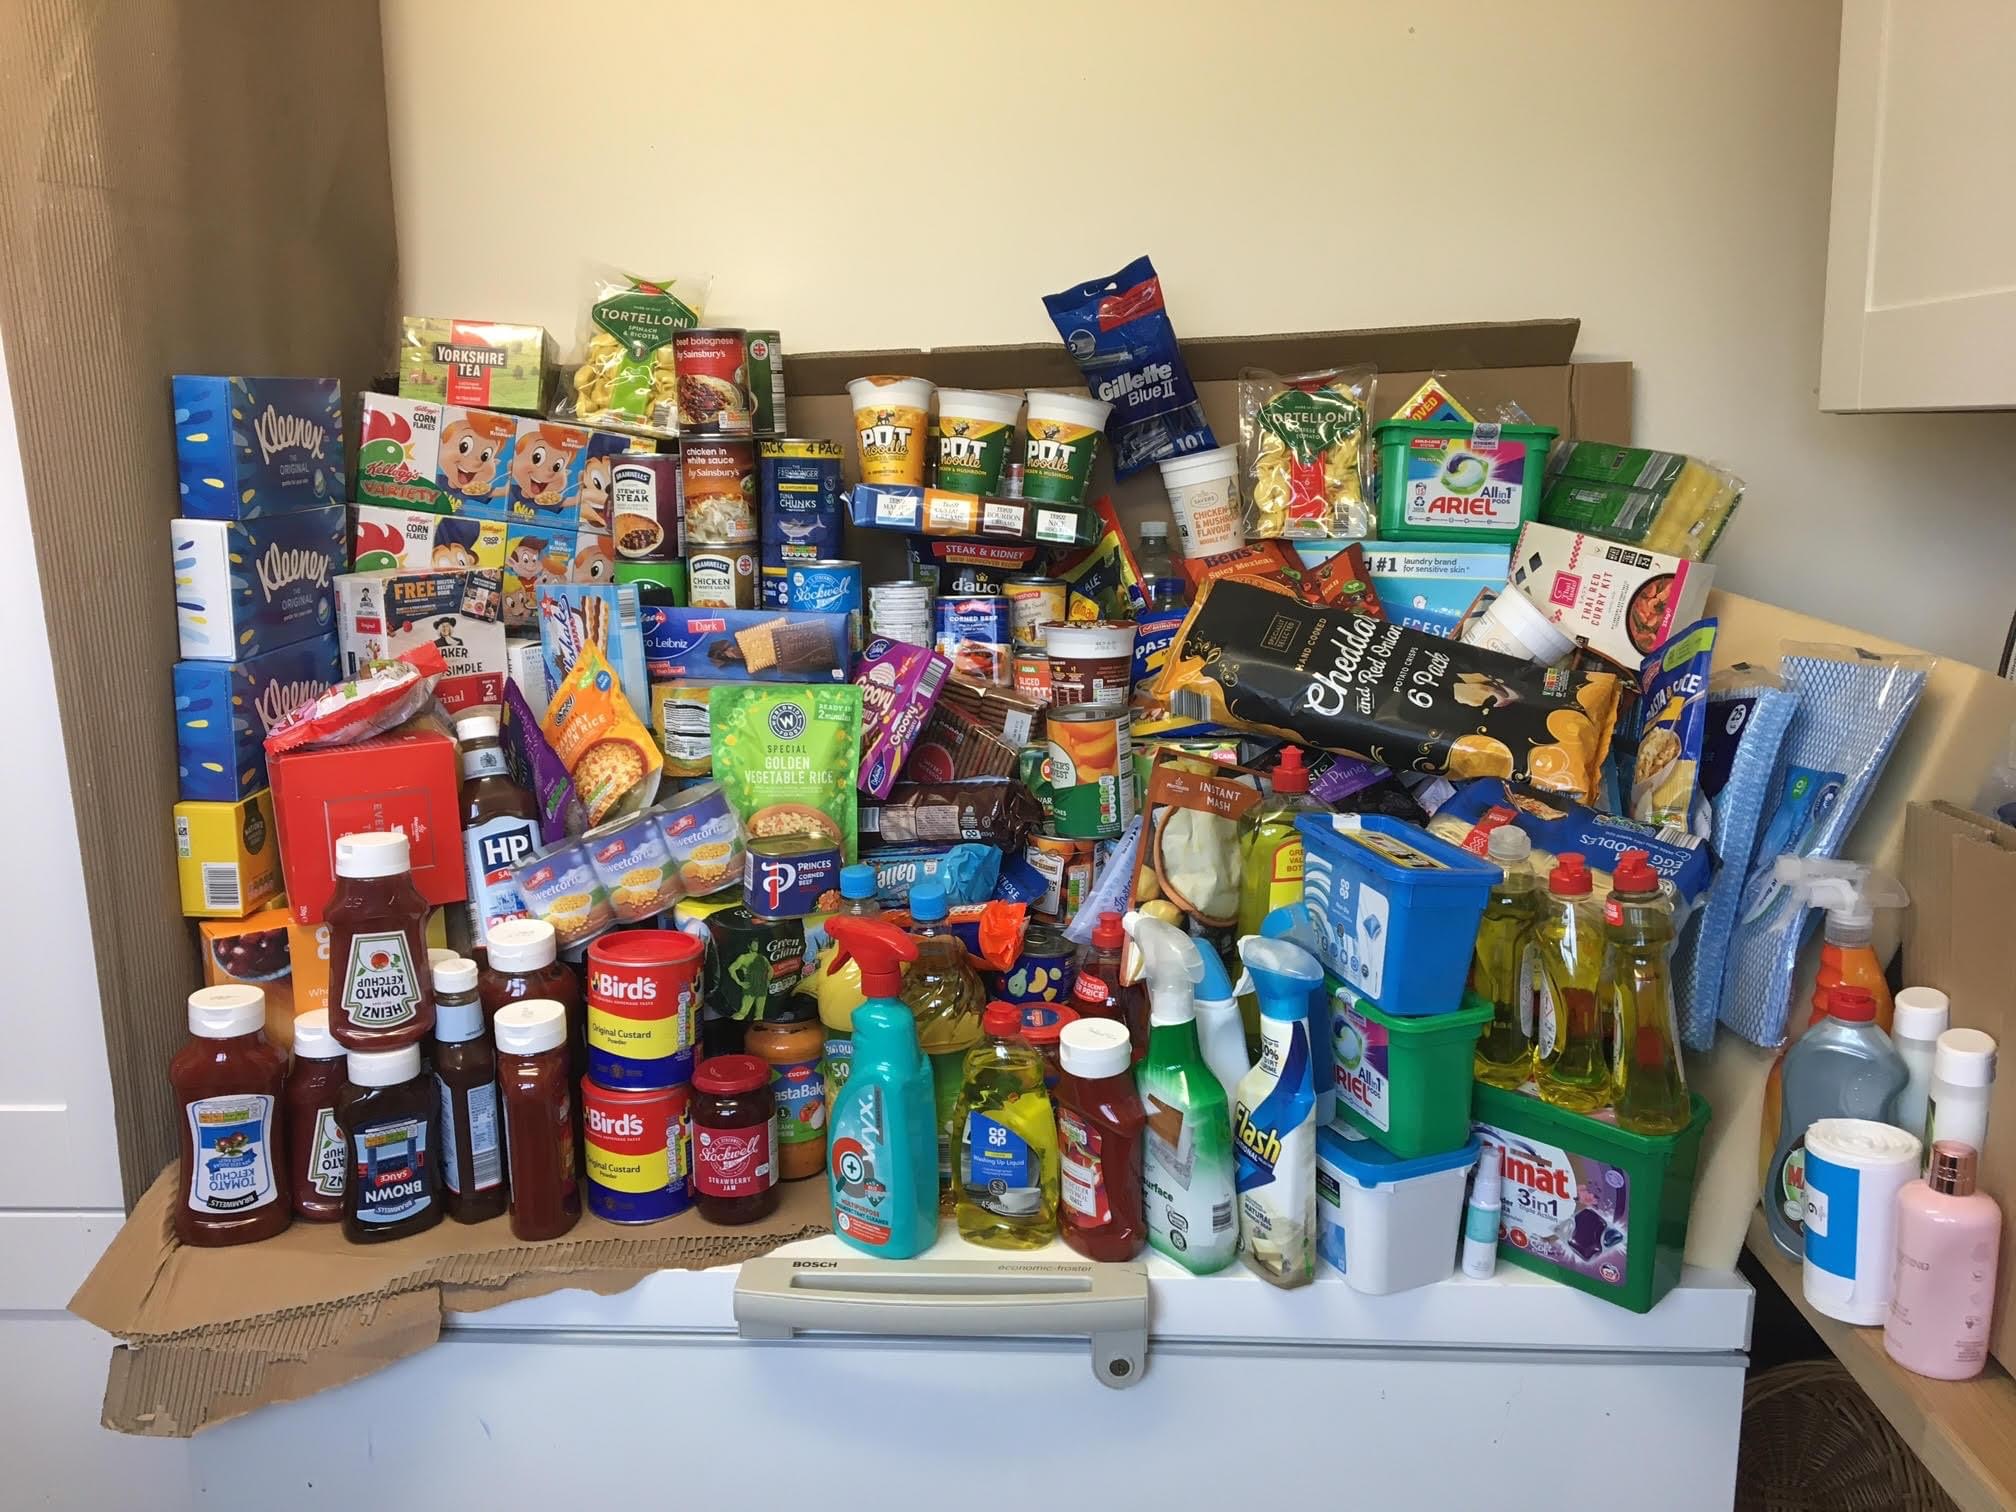 NEWS | The 10 items that Hereford Food Bank is currently asking for donations of as demand increases